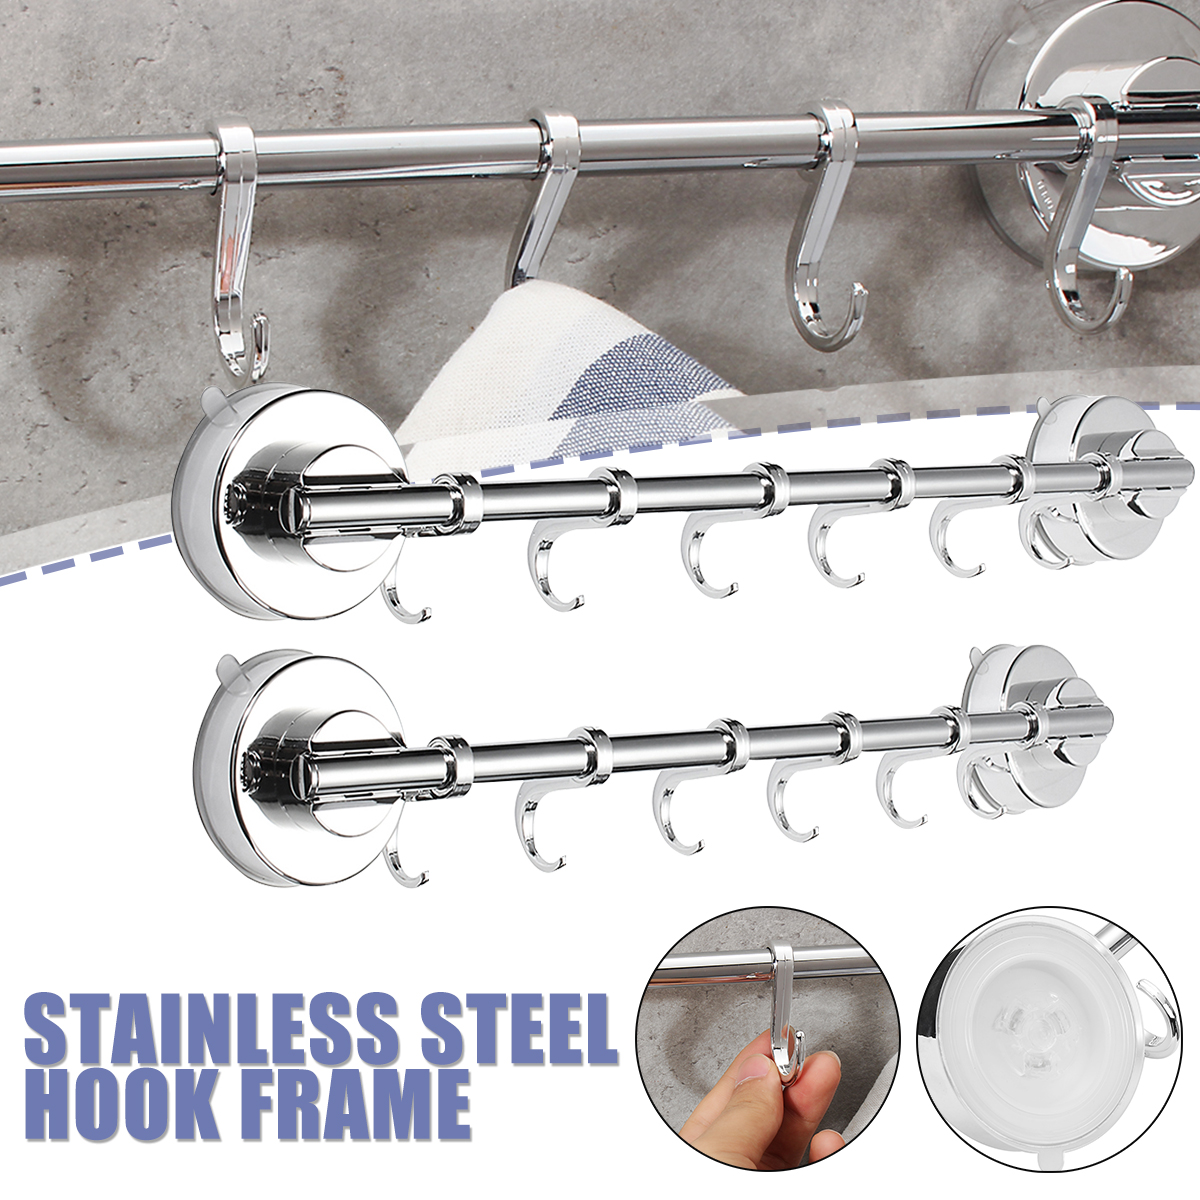 Stainless-Steel-Suction-Cup-Hanger-Hooks-Kitchen-Rack-Clothes-Hanging-Holders-Home-Hooks-1589624-8